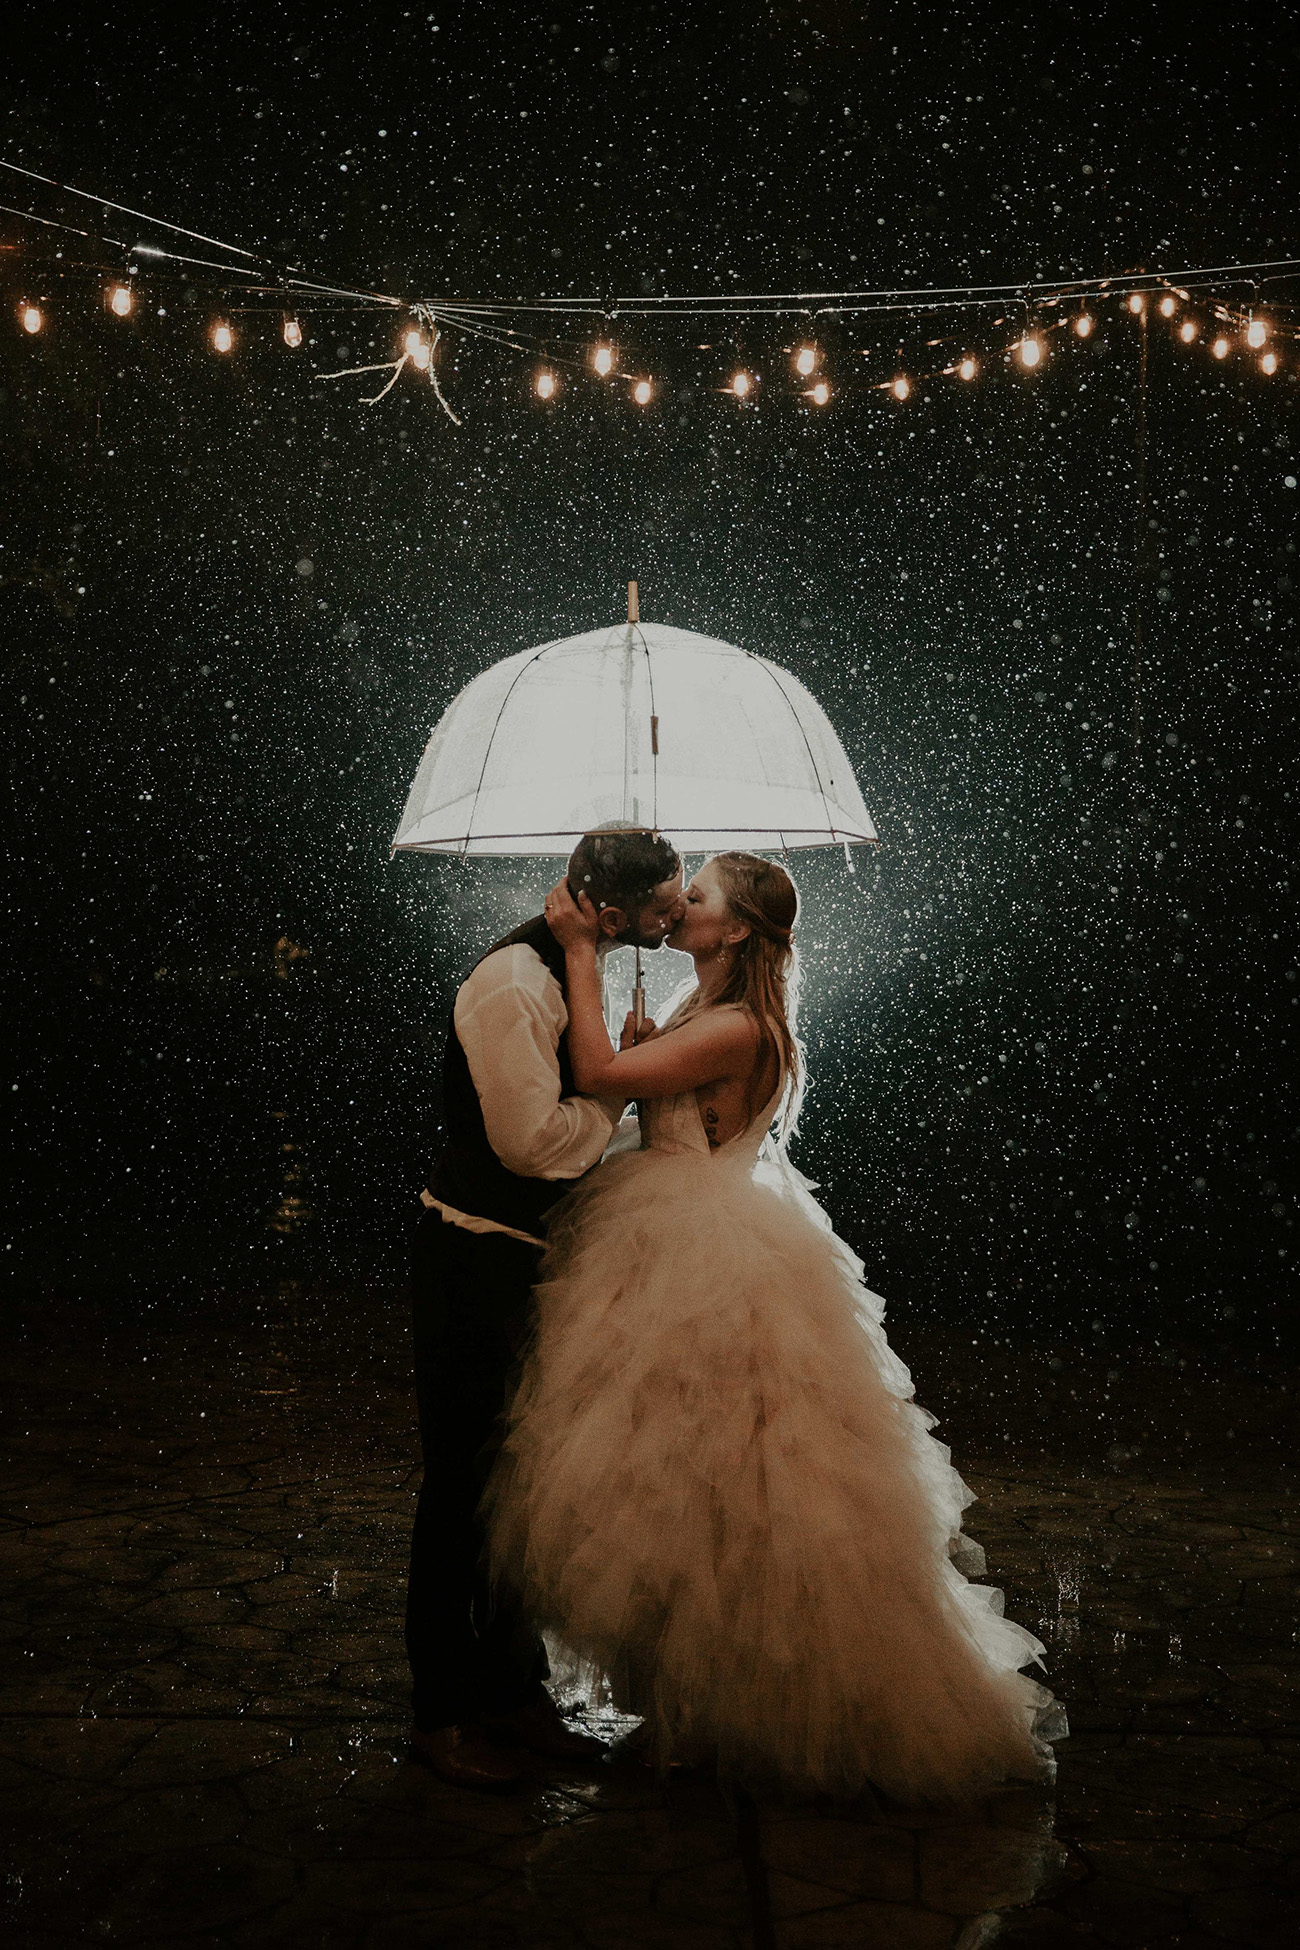 bride and groom with rain on wedding day and umbrella